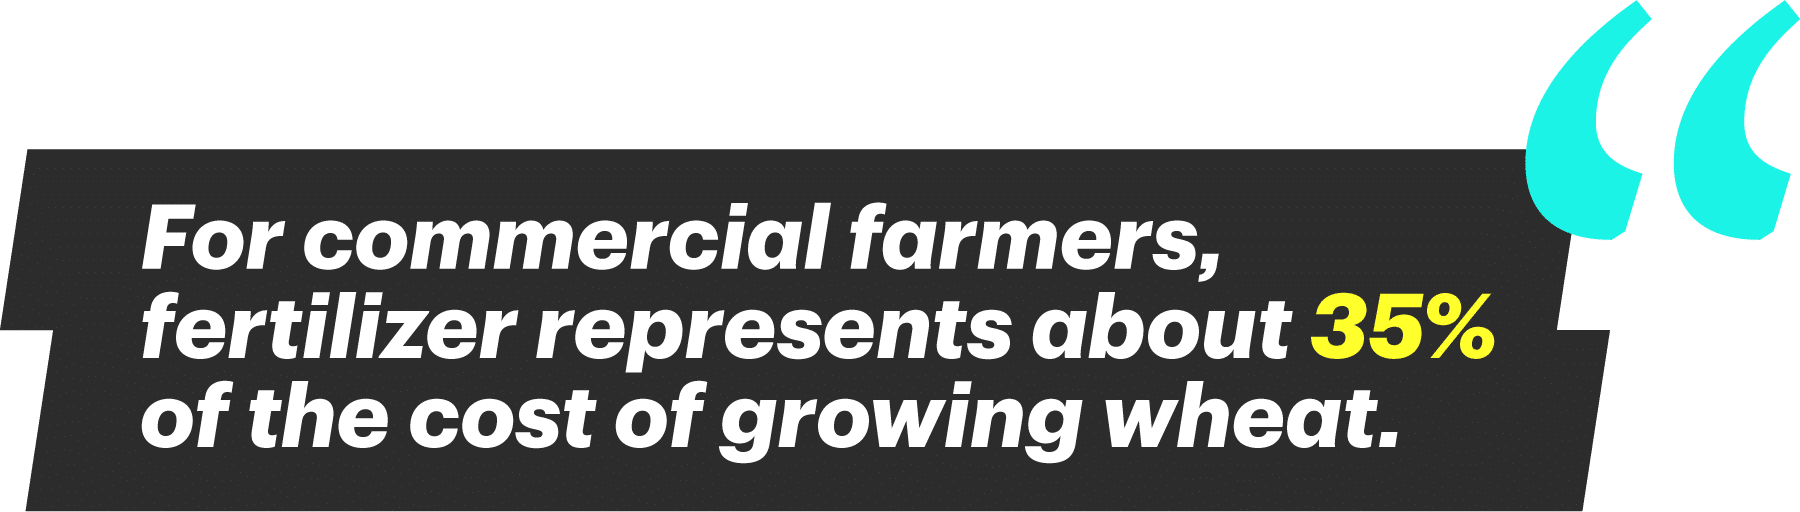 For commercial farmers, fertilizer represents about 35% of the cost of growing wheat.